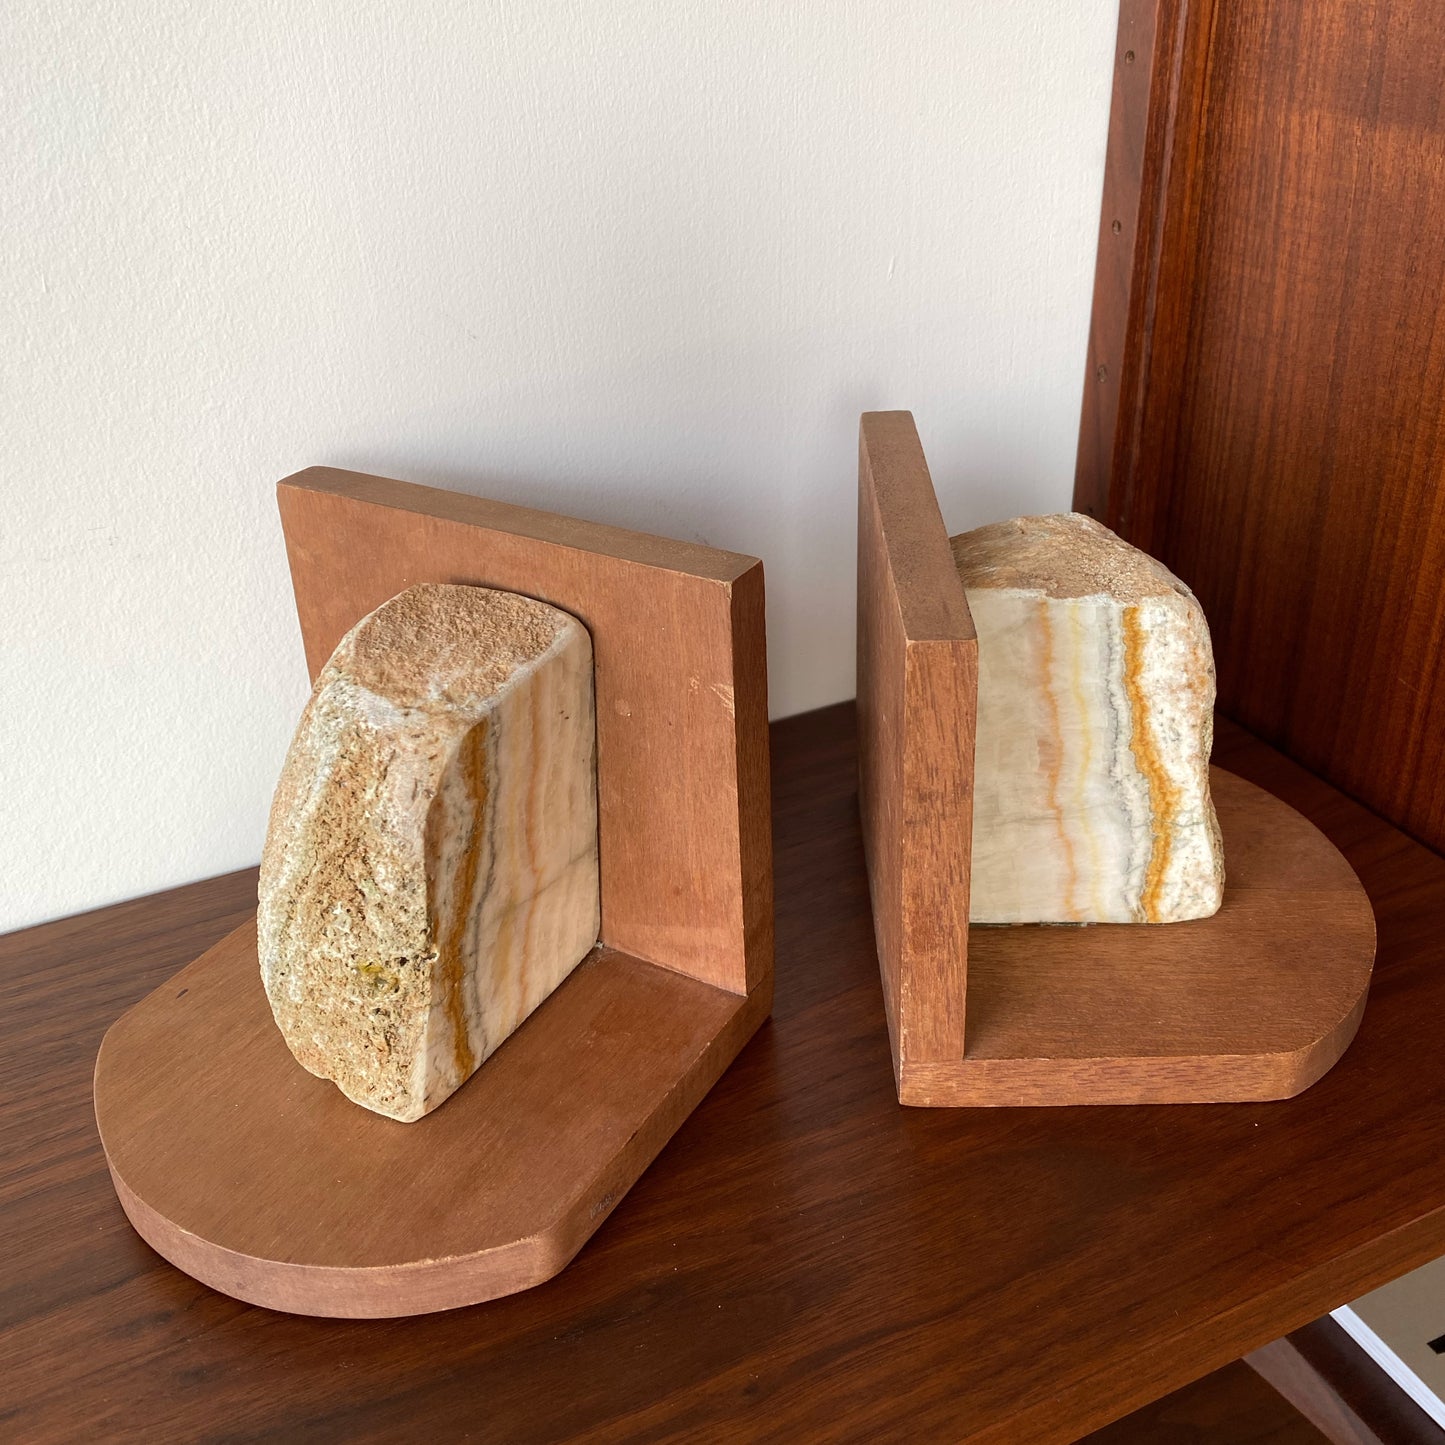 Pair of Vintage Stone Bookends